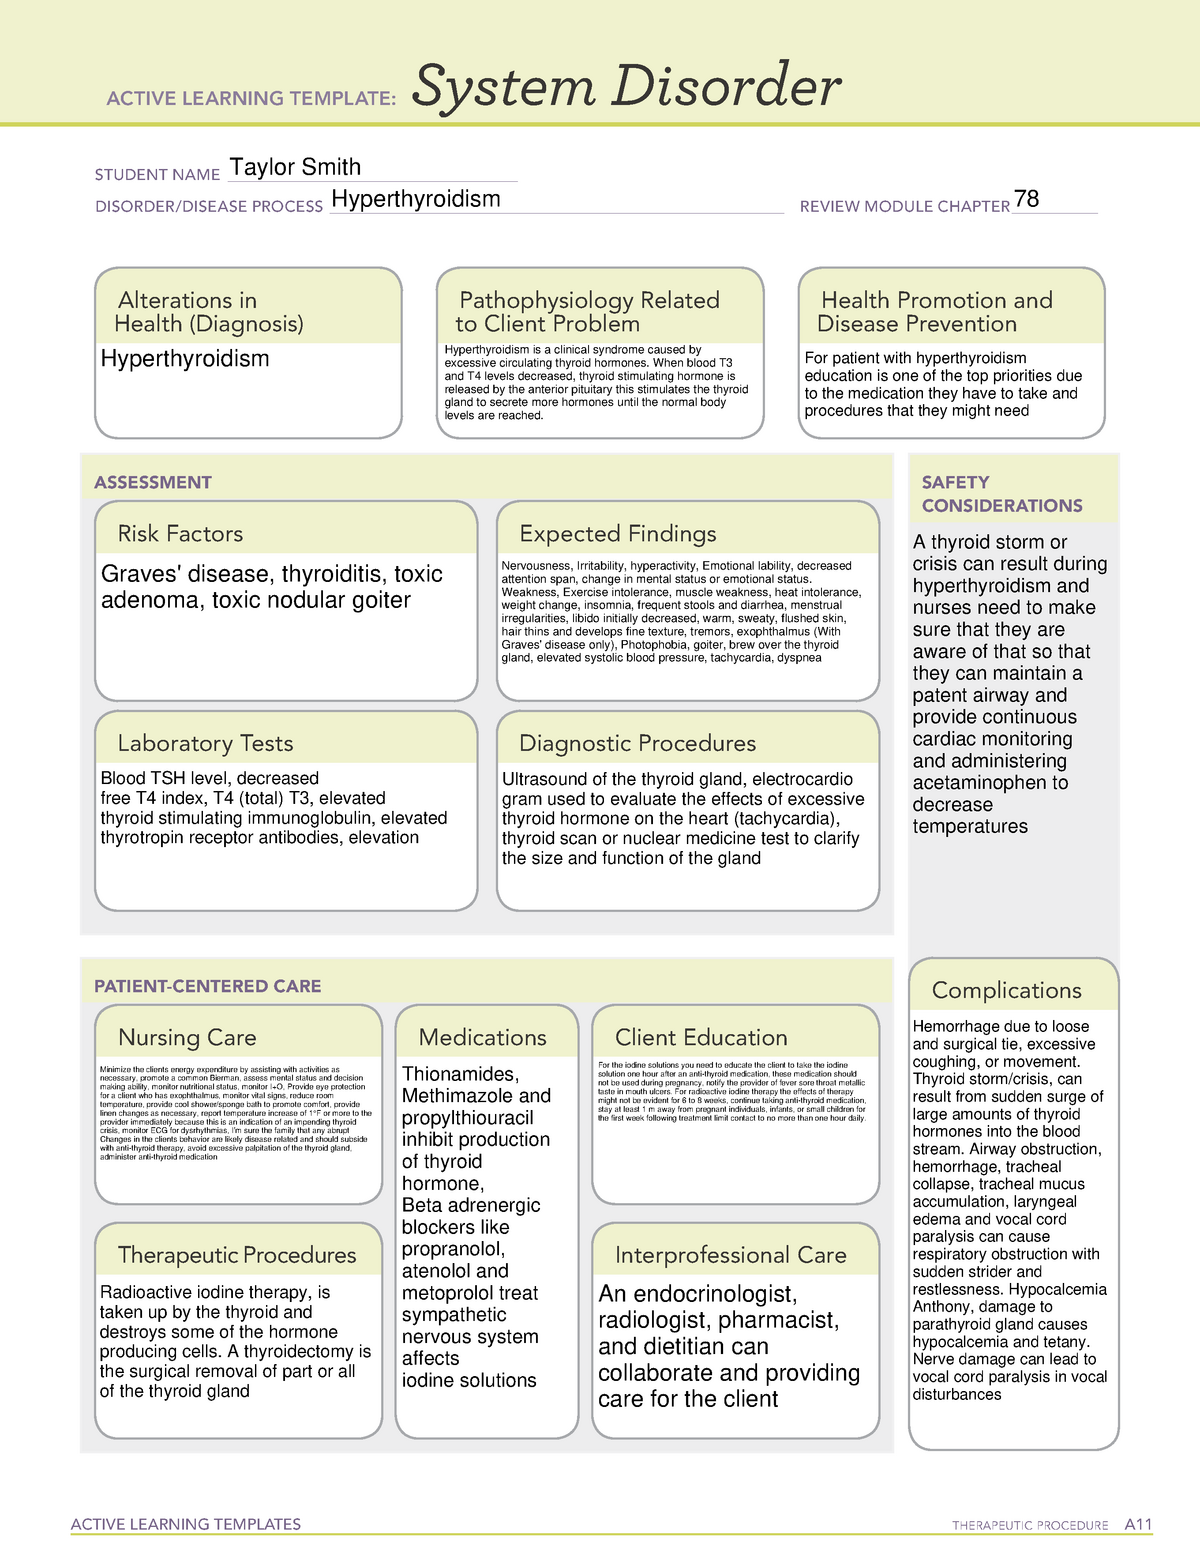 ati-endocrine-system-disorder-learning-template-active-learning